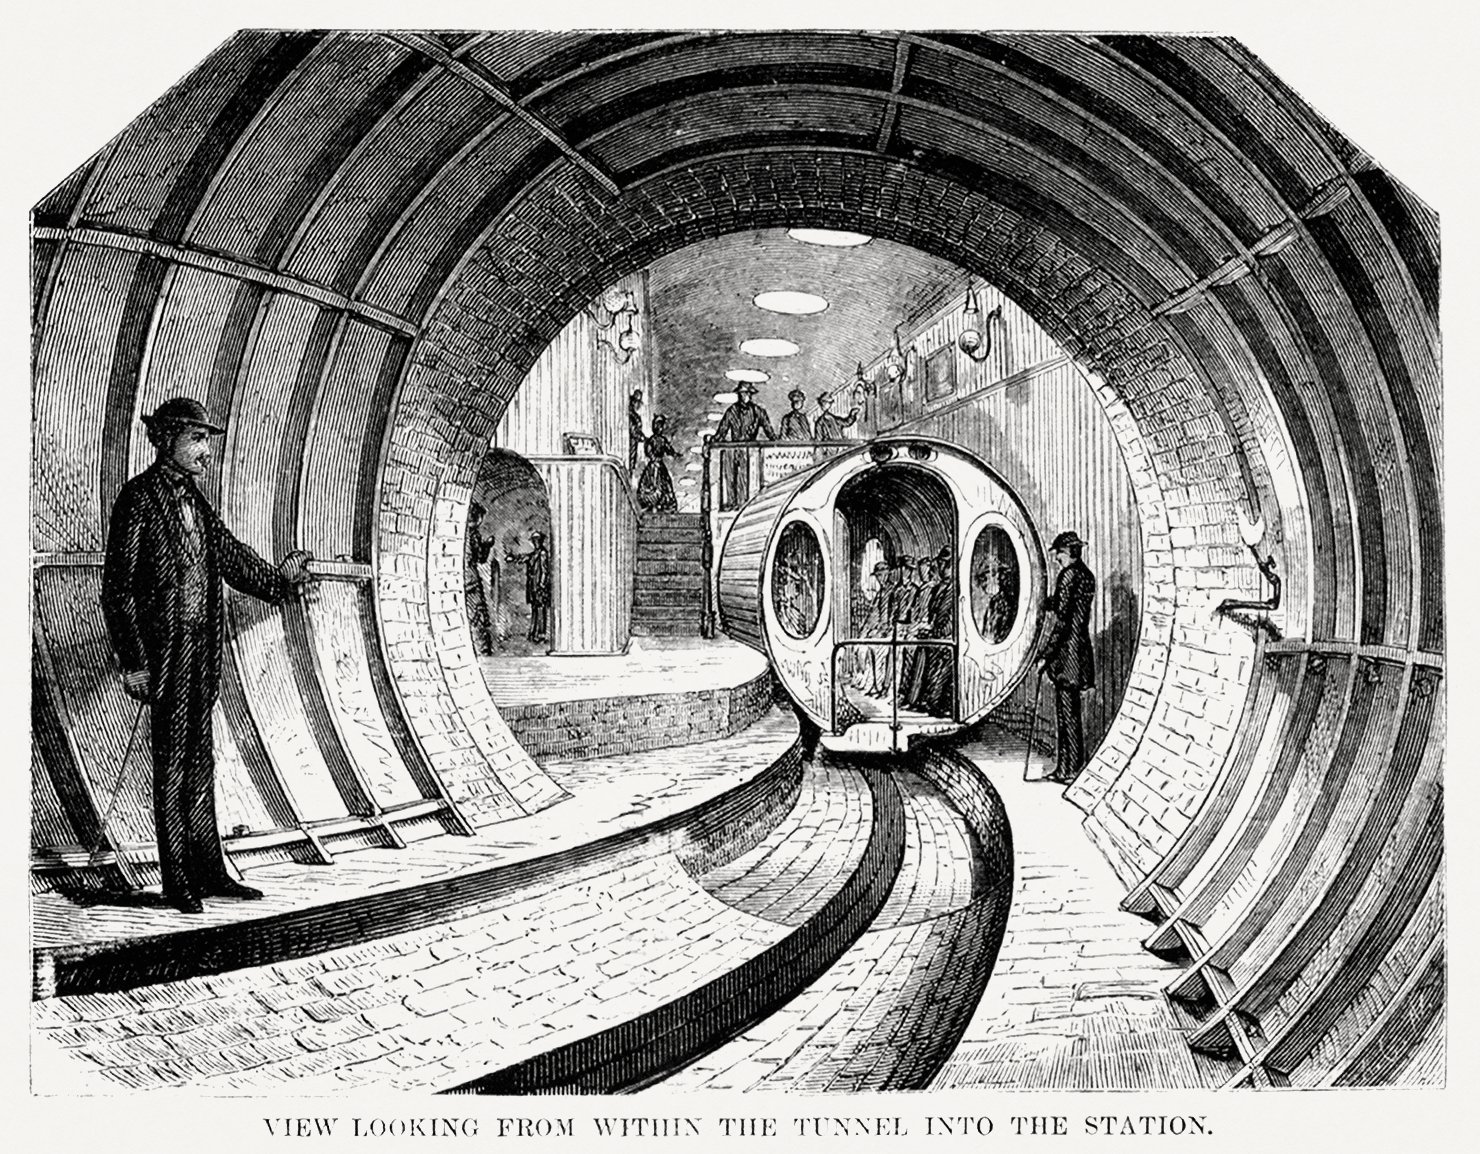 Illustration of the view when looking from within the tunnel into the station from Illustrated description of the Broadway underground railway (1872)